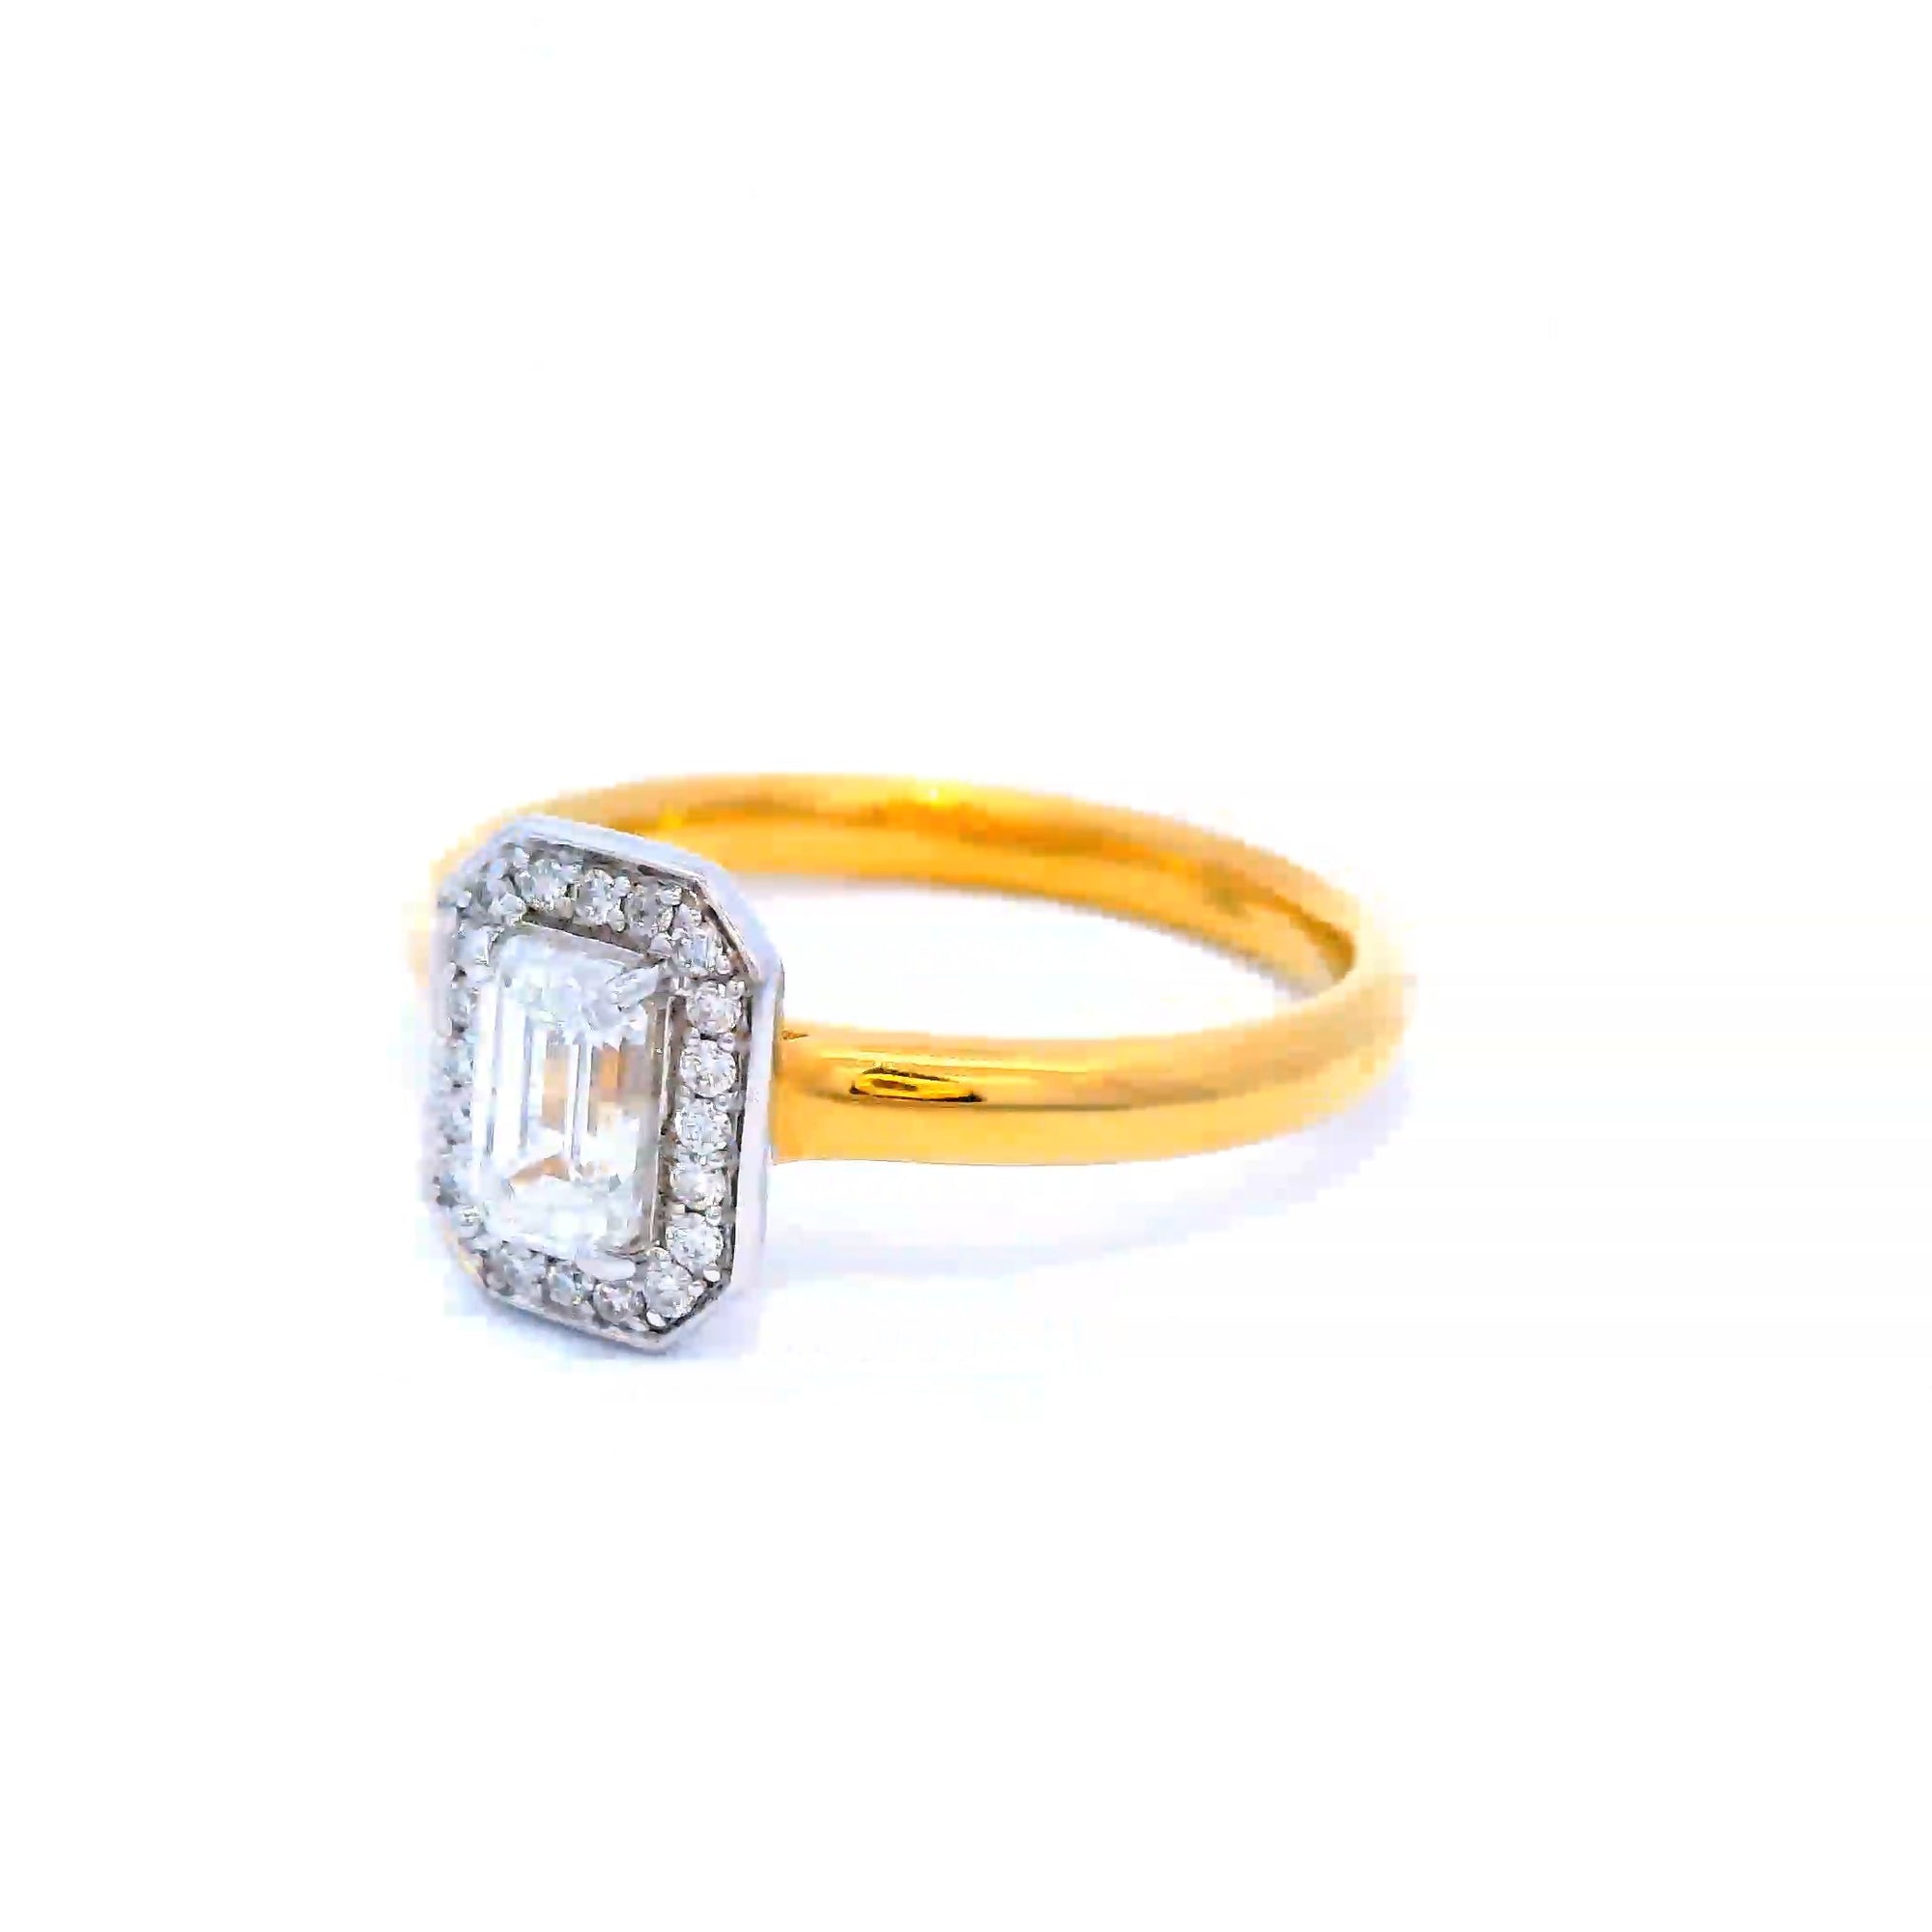 Diamond Radiant Engagement Ring in 18ct Yellow Gold